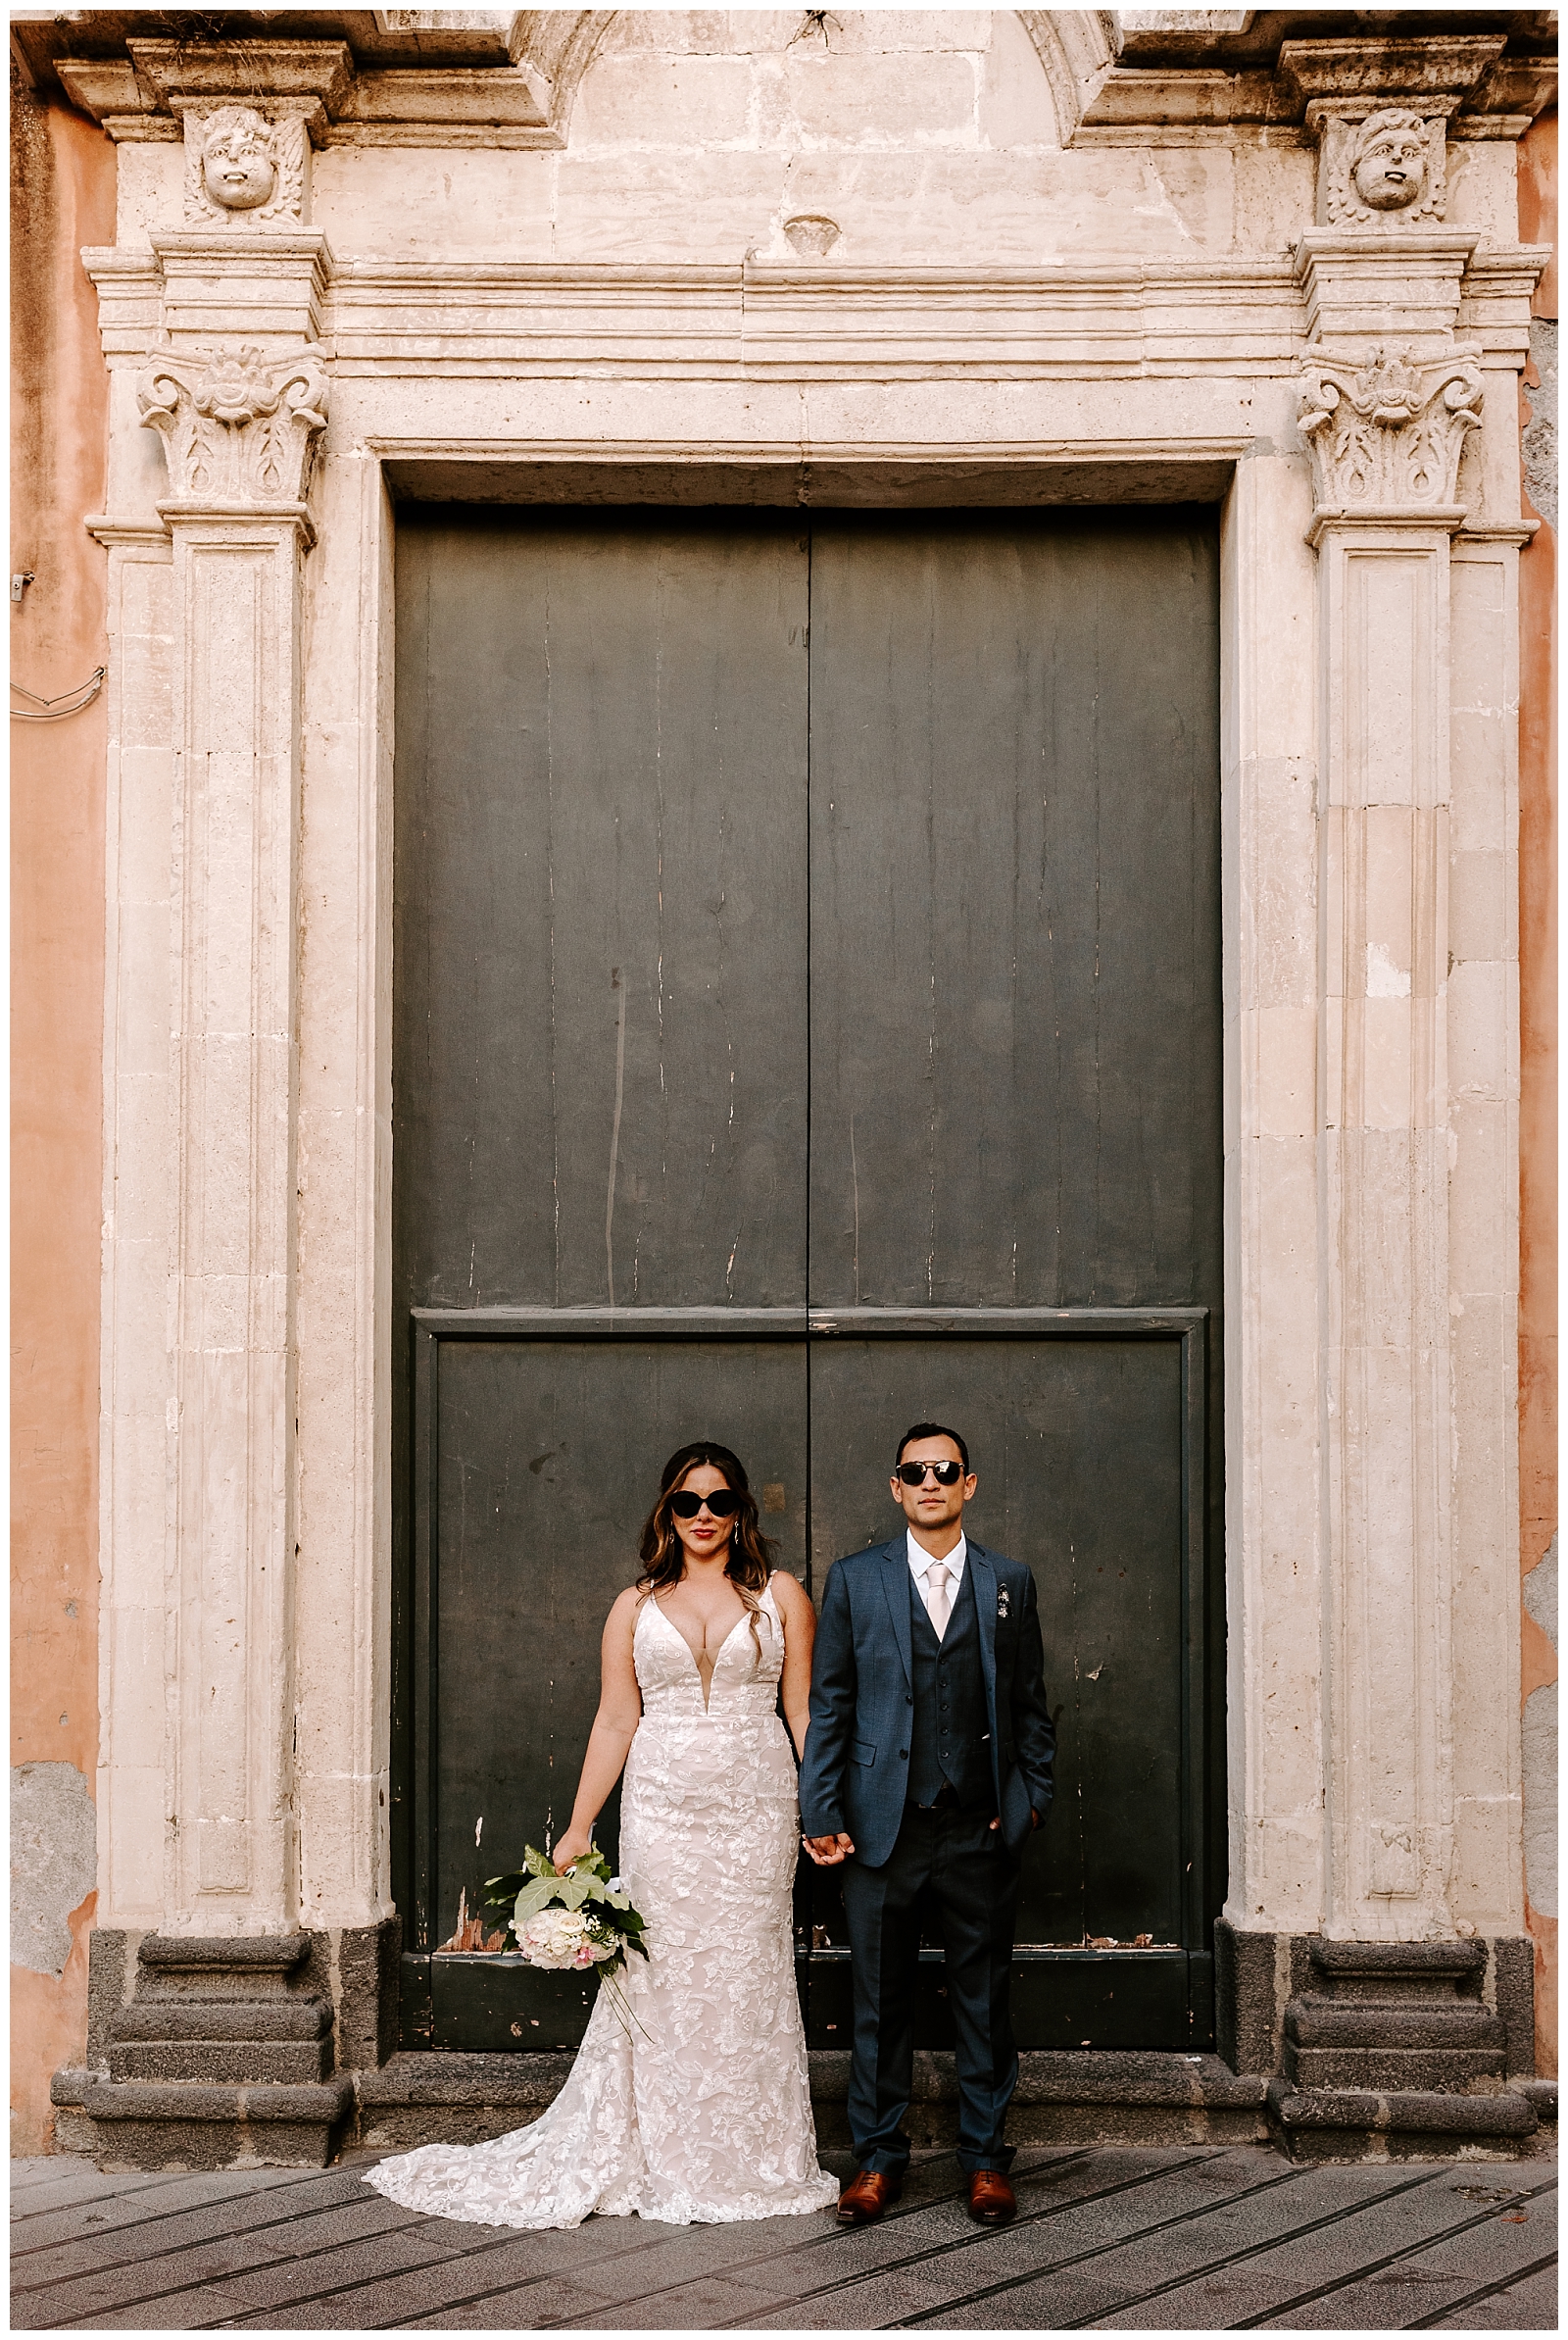 Intimate wedding in Italy